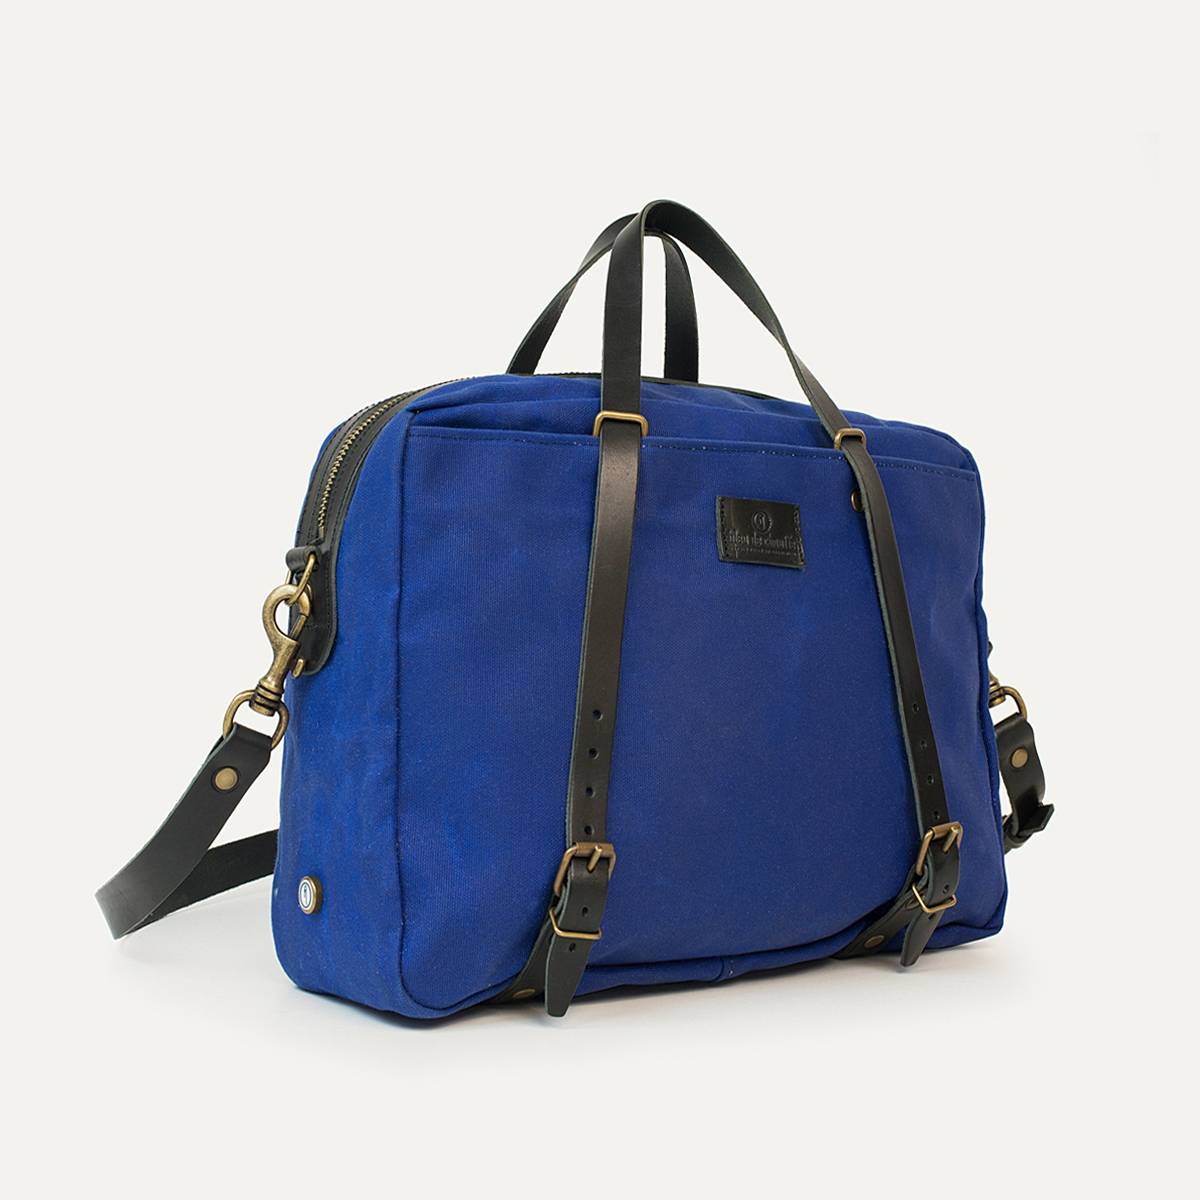 Business bag Report WAXY - Blue (image n°1)